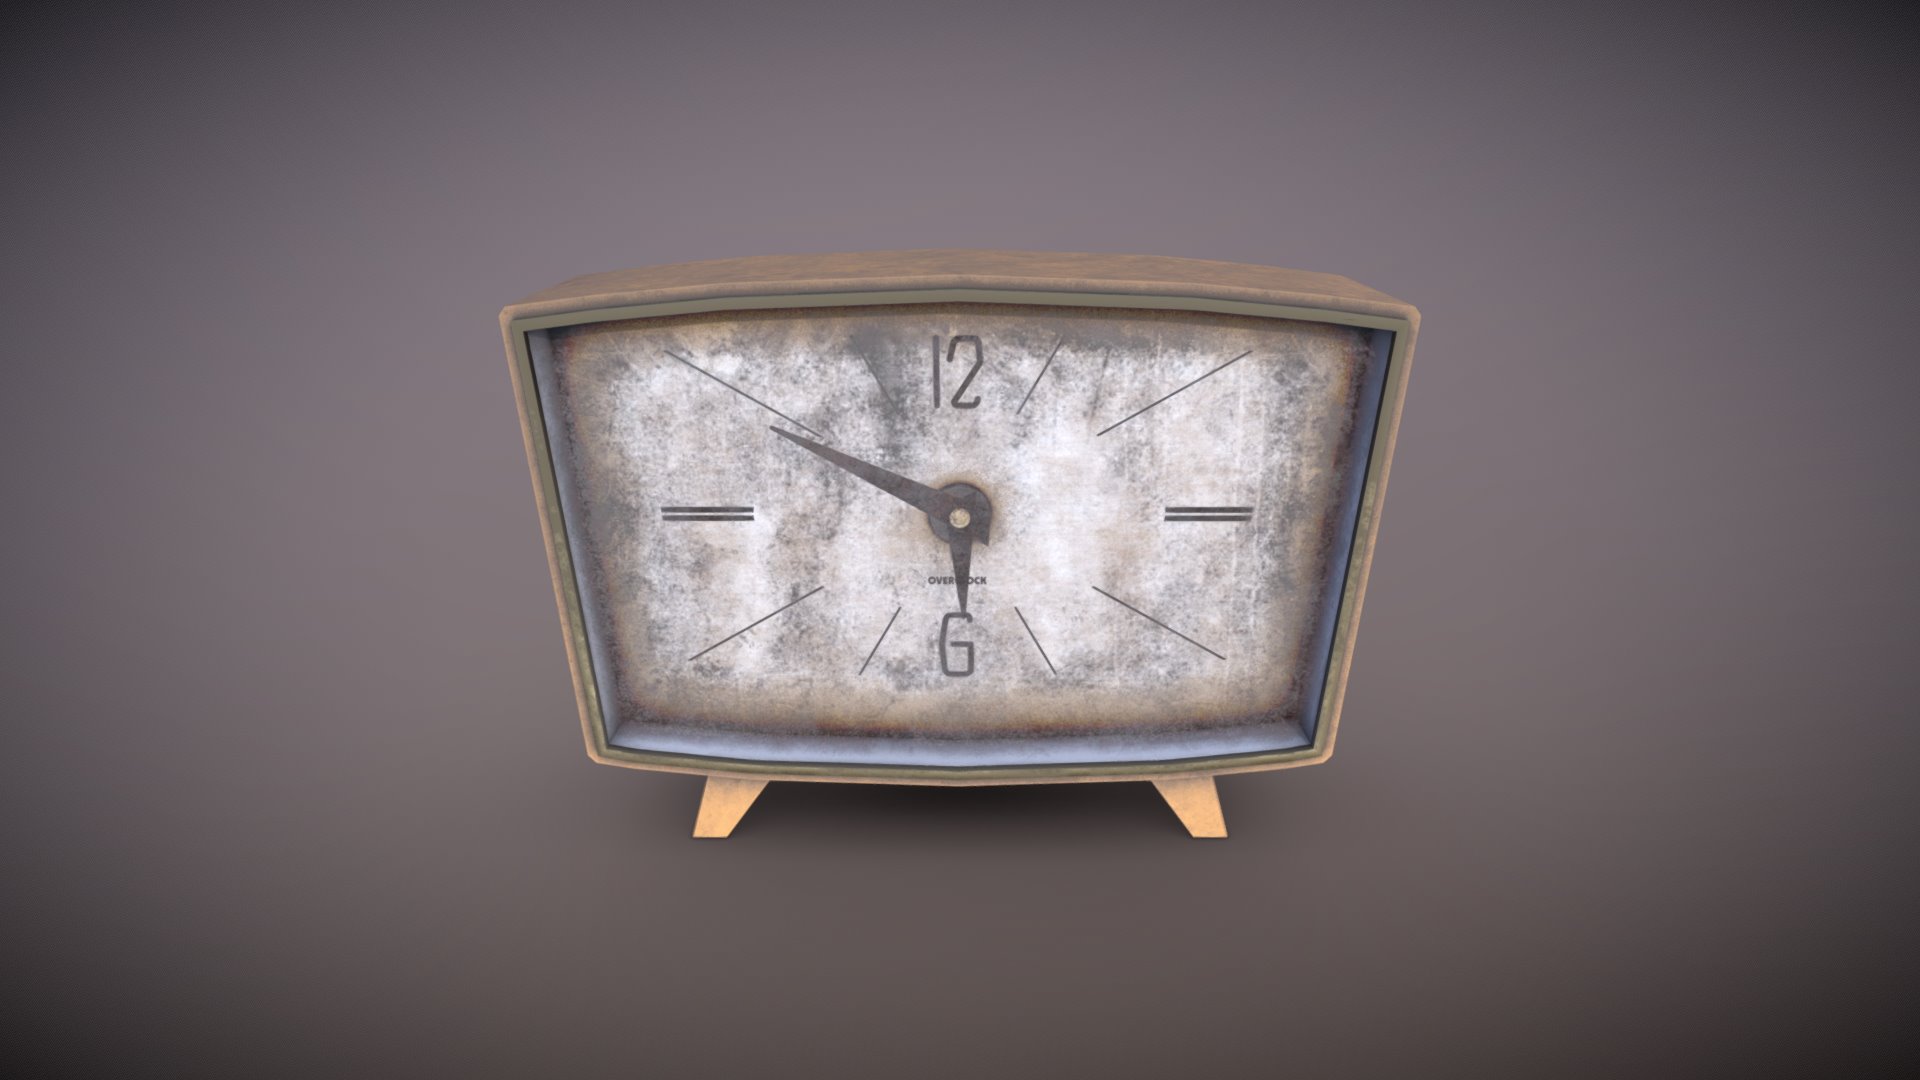 3D model Dirty desktop clock 12 of 20 - This is a 3D model of the Dirty desktop clock 12 of 20. The 3D model is about a clock on a wall.